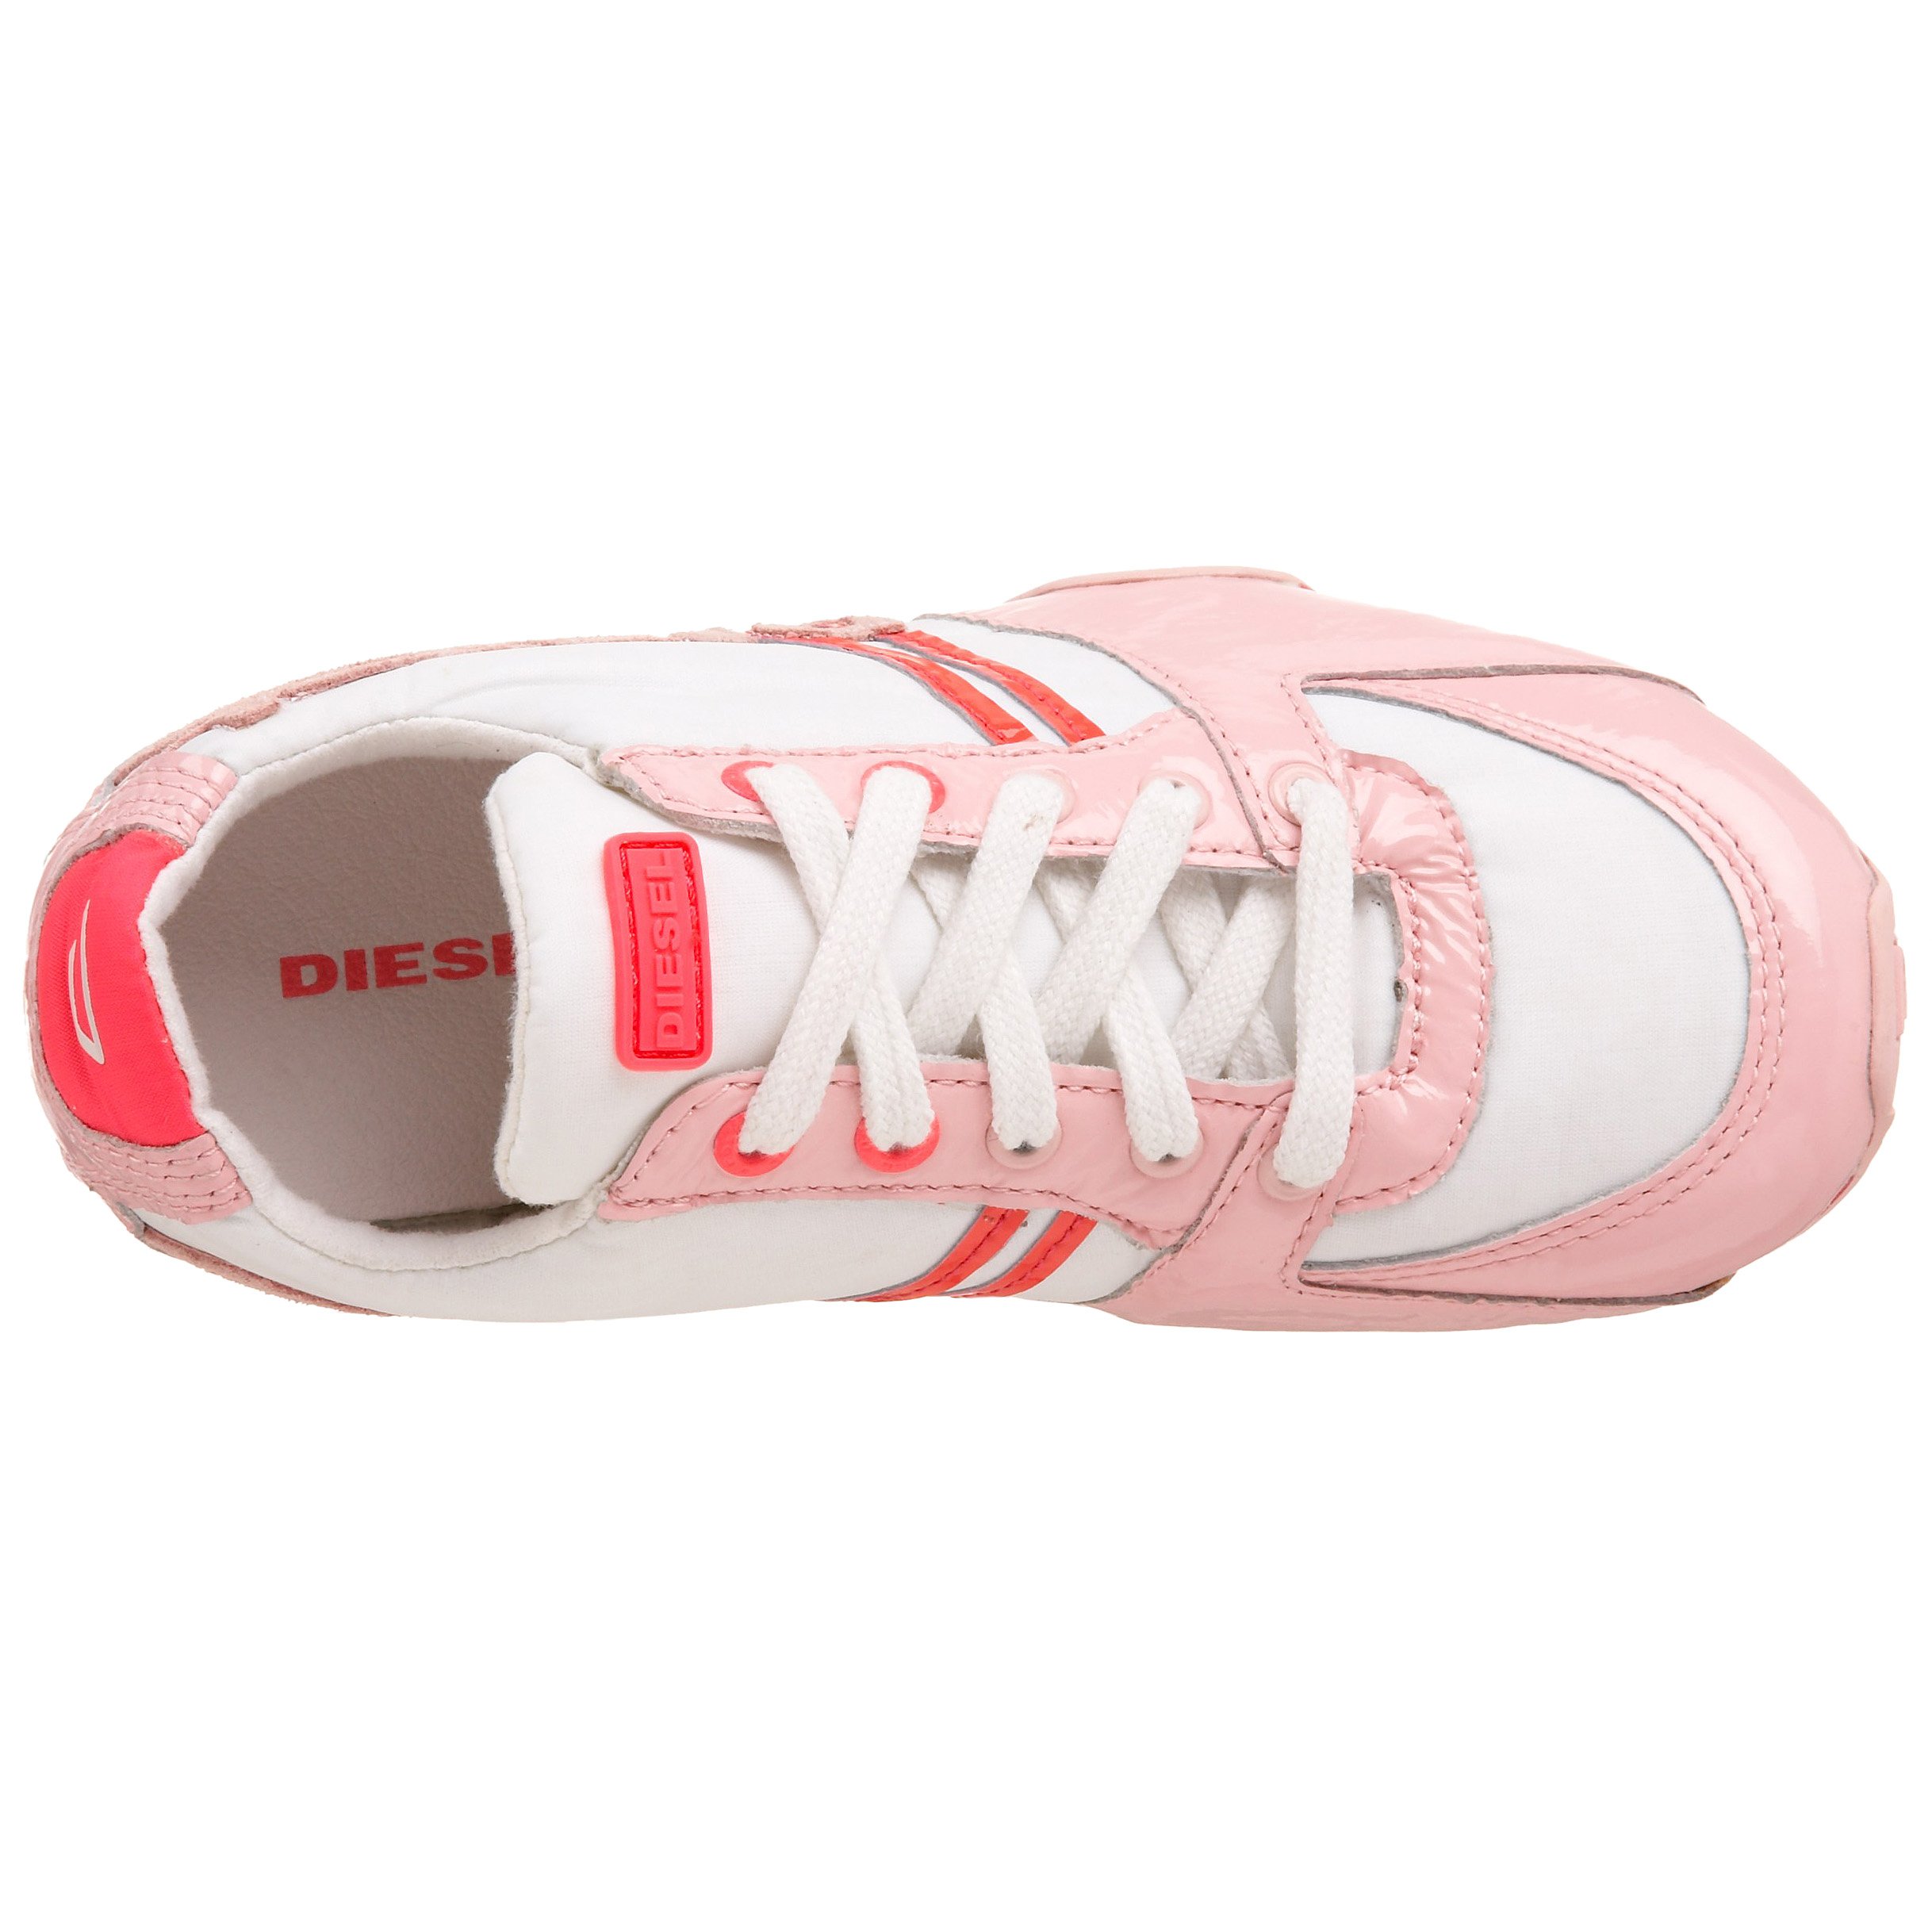 Diesel Toddler/Little Kid Parabarny Lace-Up Sneaker